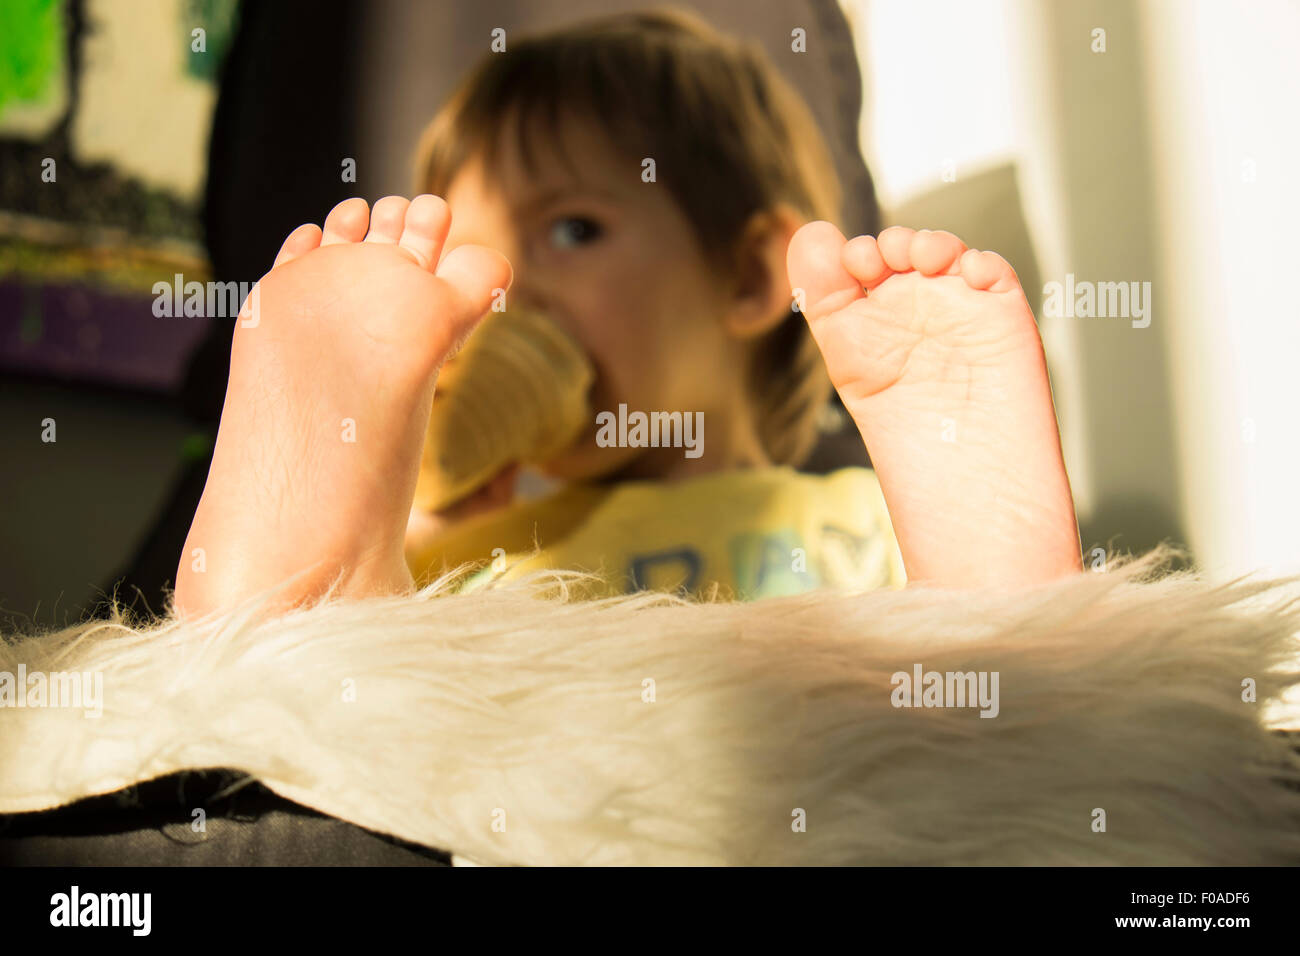 Young boy drinking from beaker, focus on feet Stock Photo